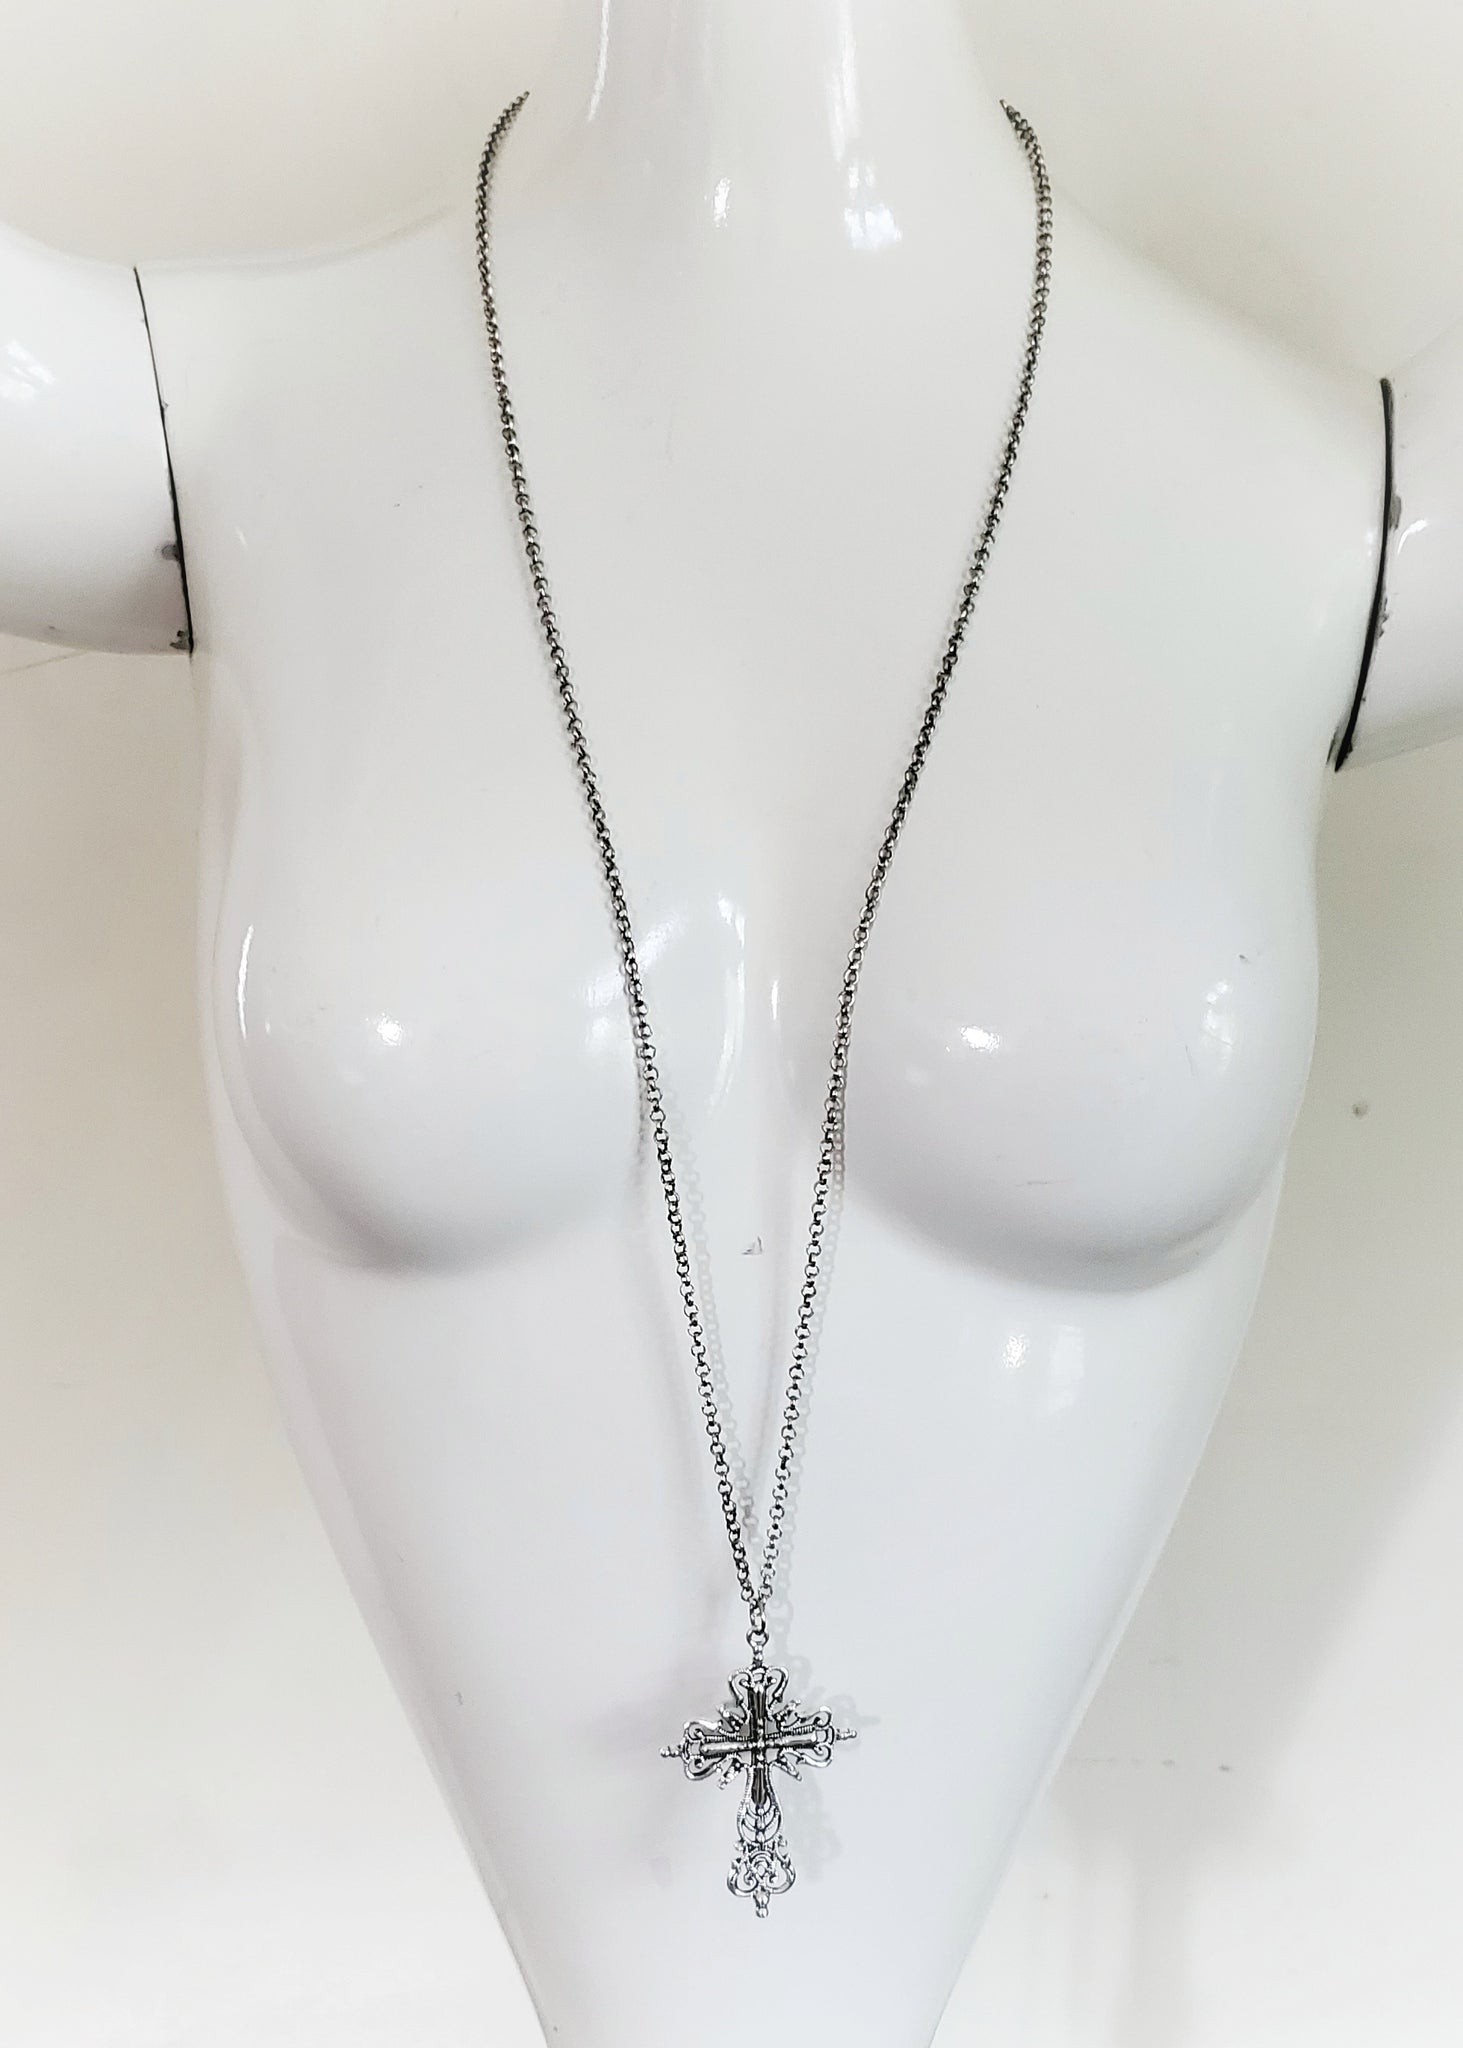 Silver Gothic Cross Necklace Fantasy Jewelry